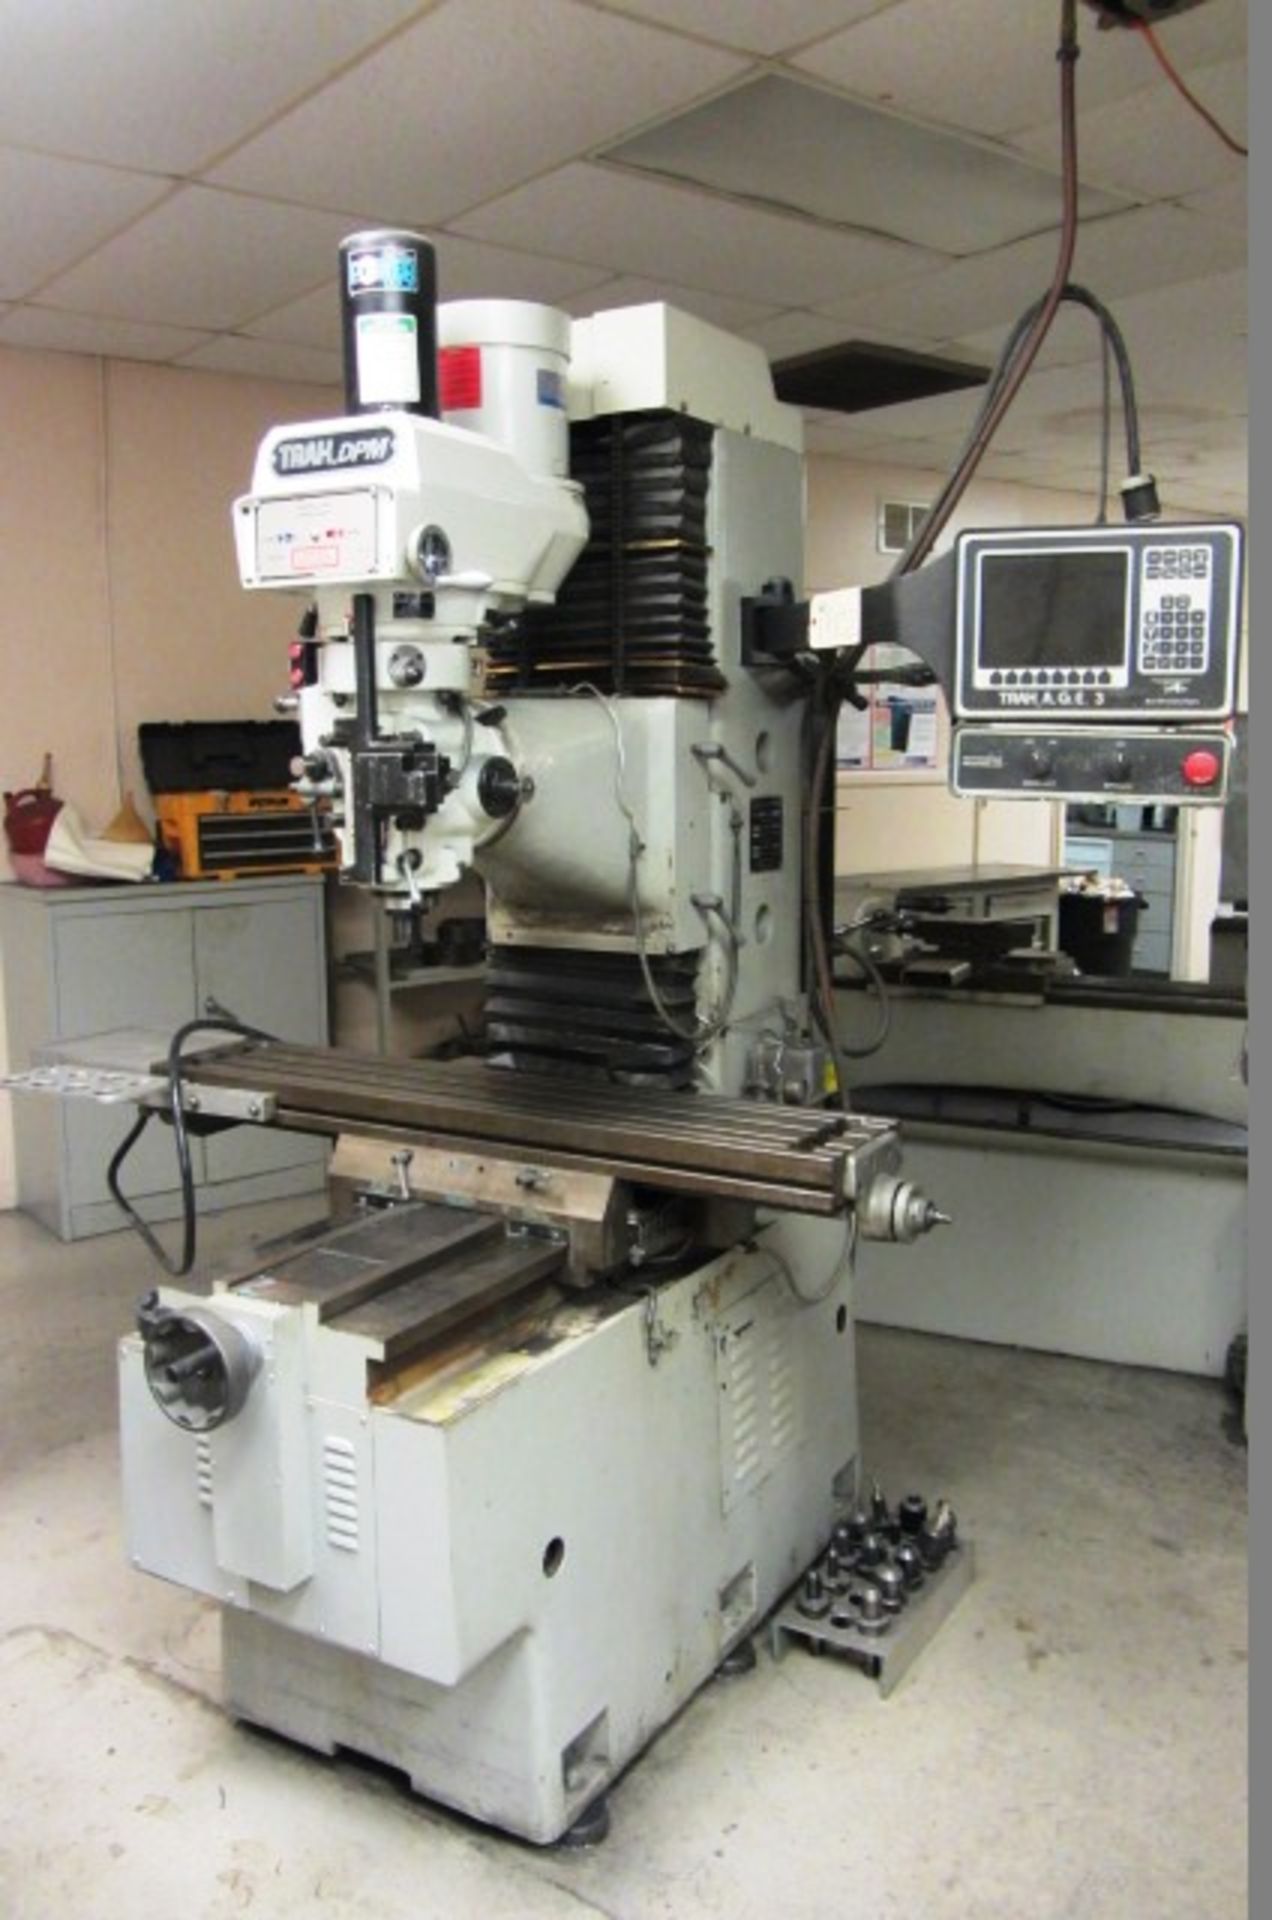 Prototrak Model DPM 3-Axis CNC Bedmill with 50'' x 10'' Table, #40 Taper Spindle Speeds to 4,200